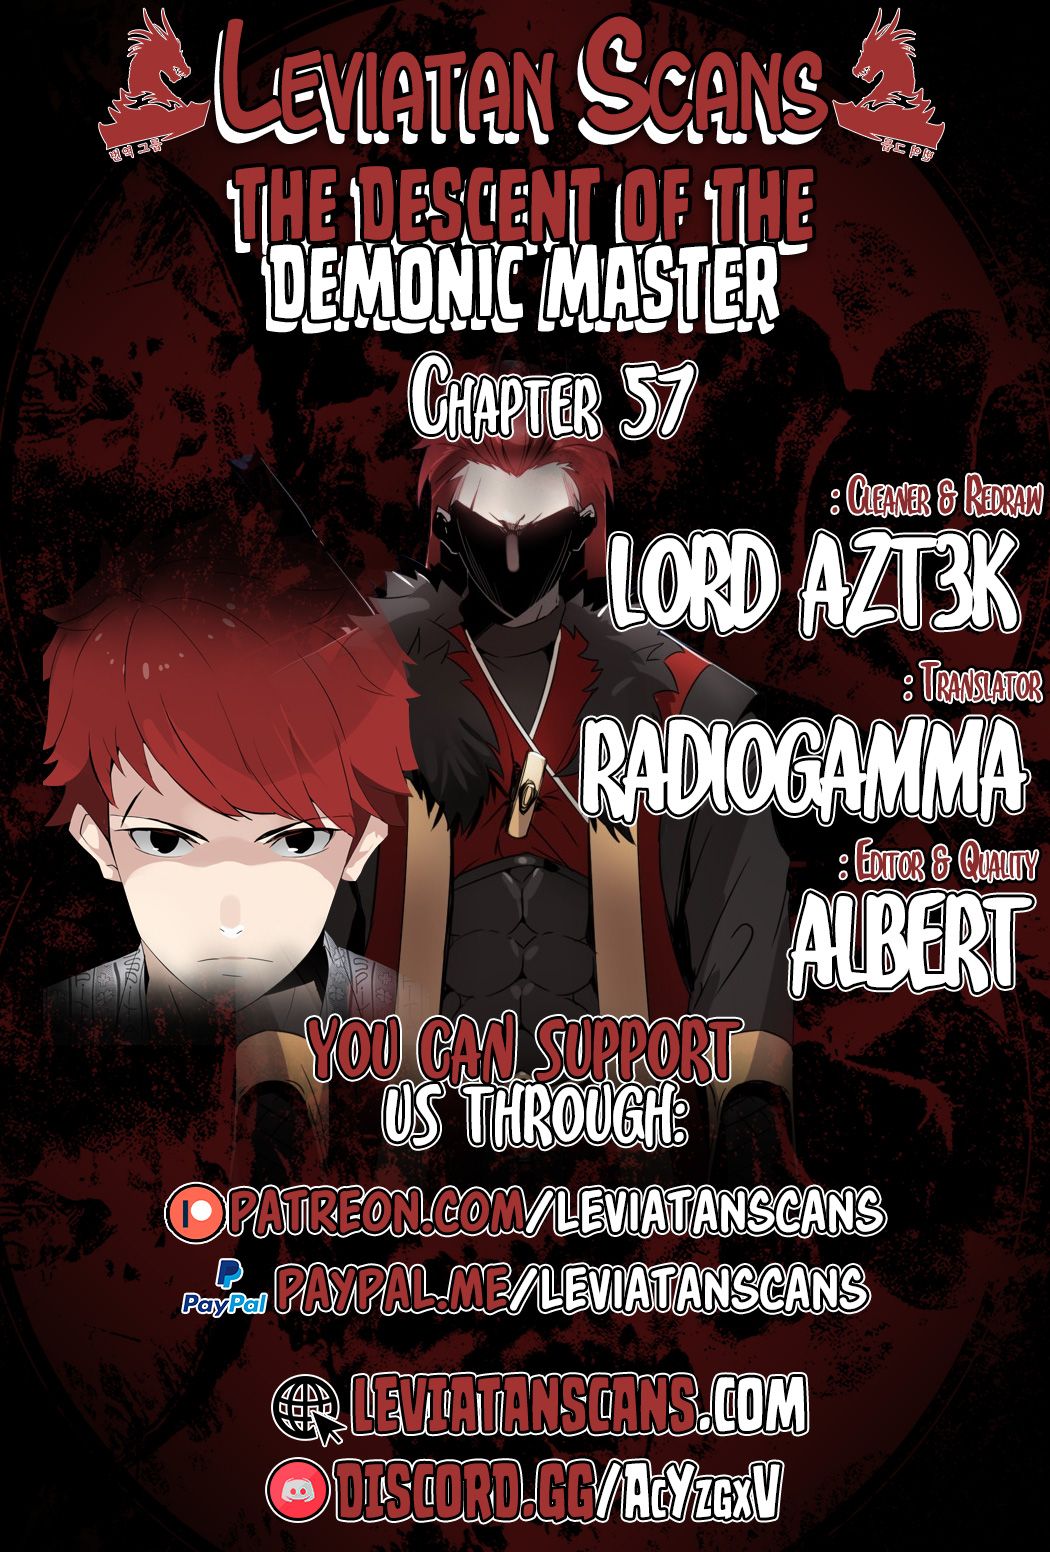 The Descent of the Demonic Master57 01